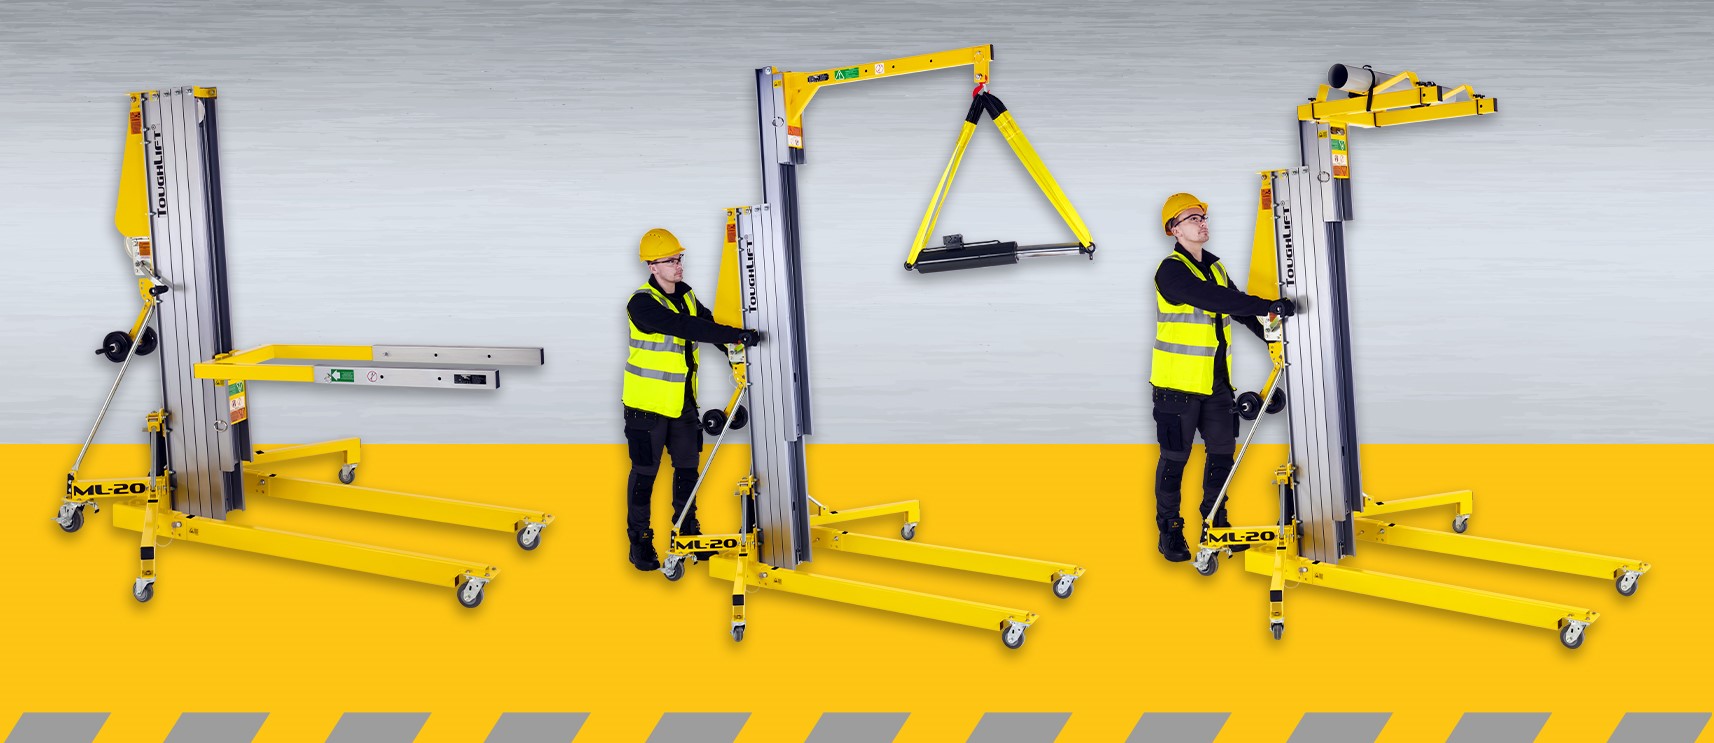 APS launches next generation range of material lifts